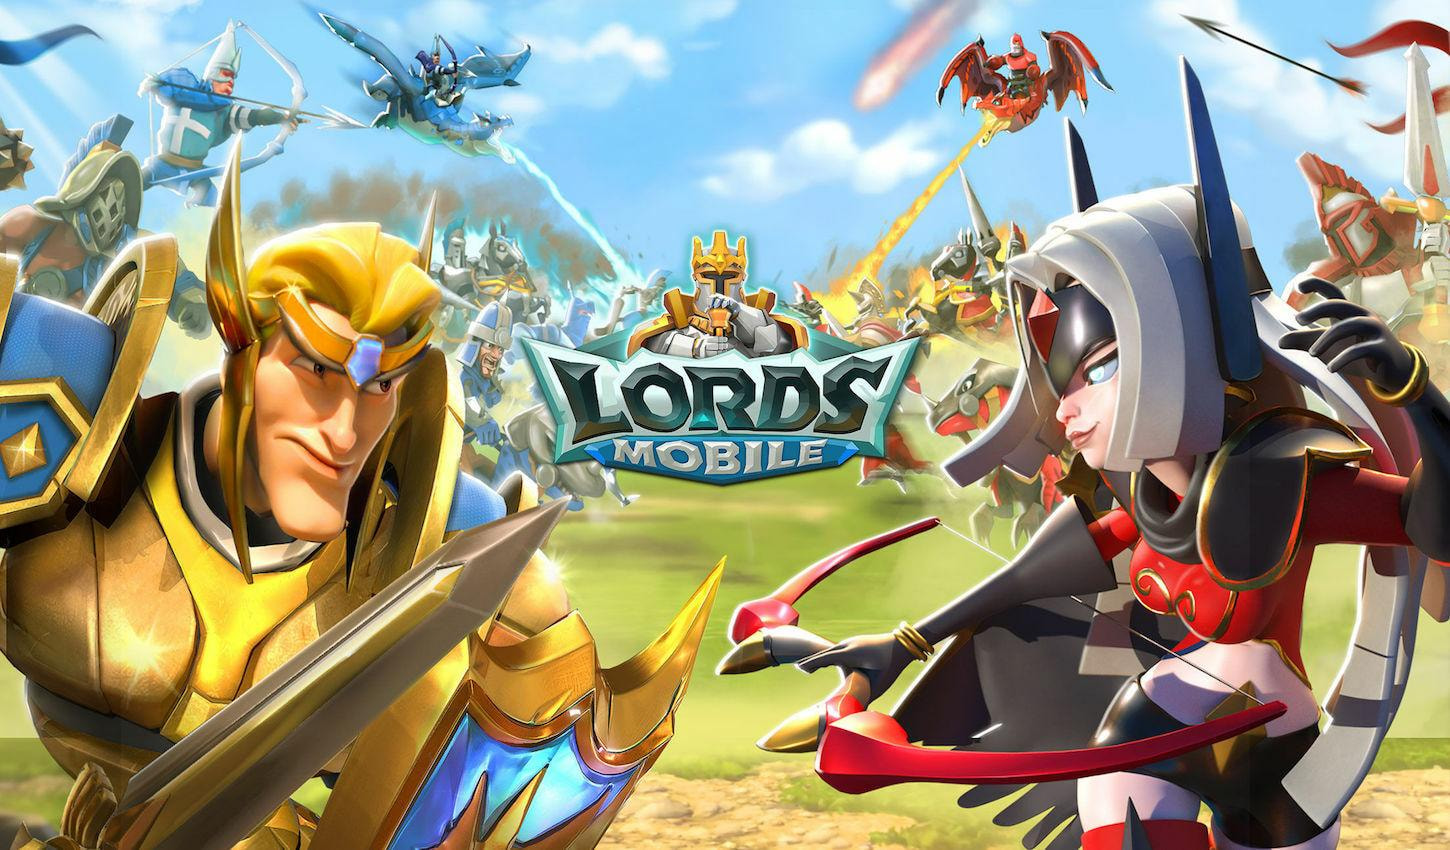 Download and play Lords Mobile Shrek Kingdom GO!s on PC & Mac